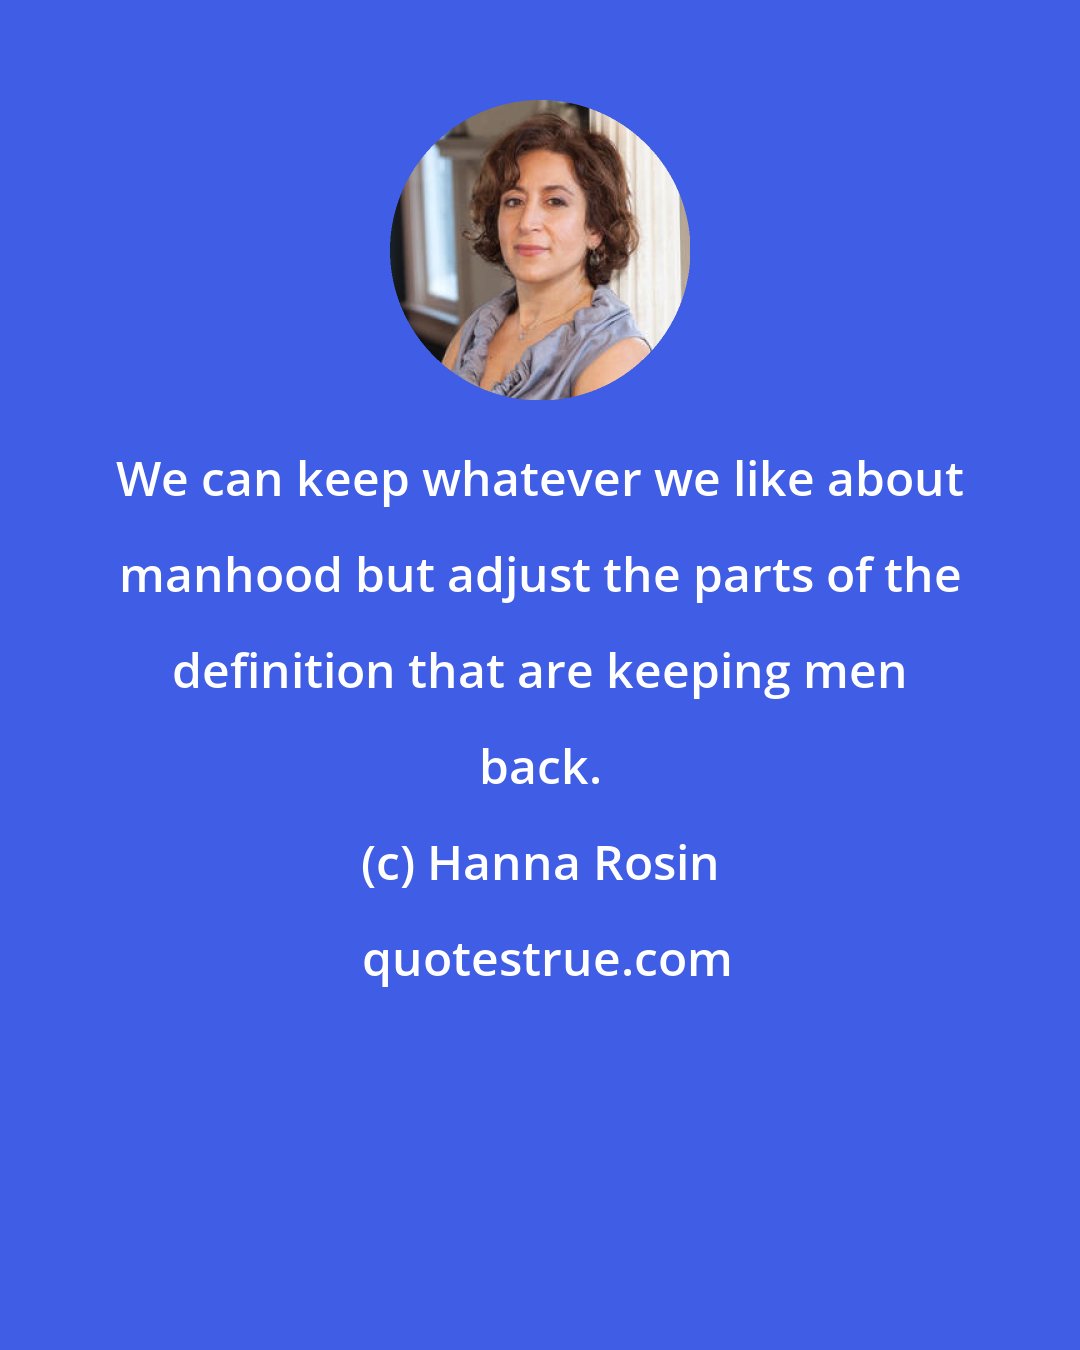 Hanna Rosin: We can keep whatever we like about manhood but adjust the parts of the definition that are keeping men back.